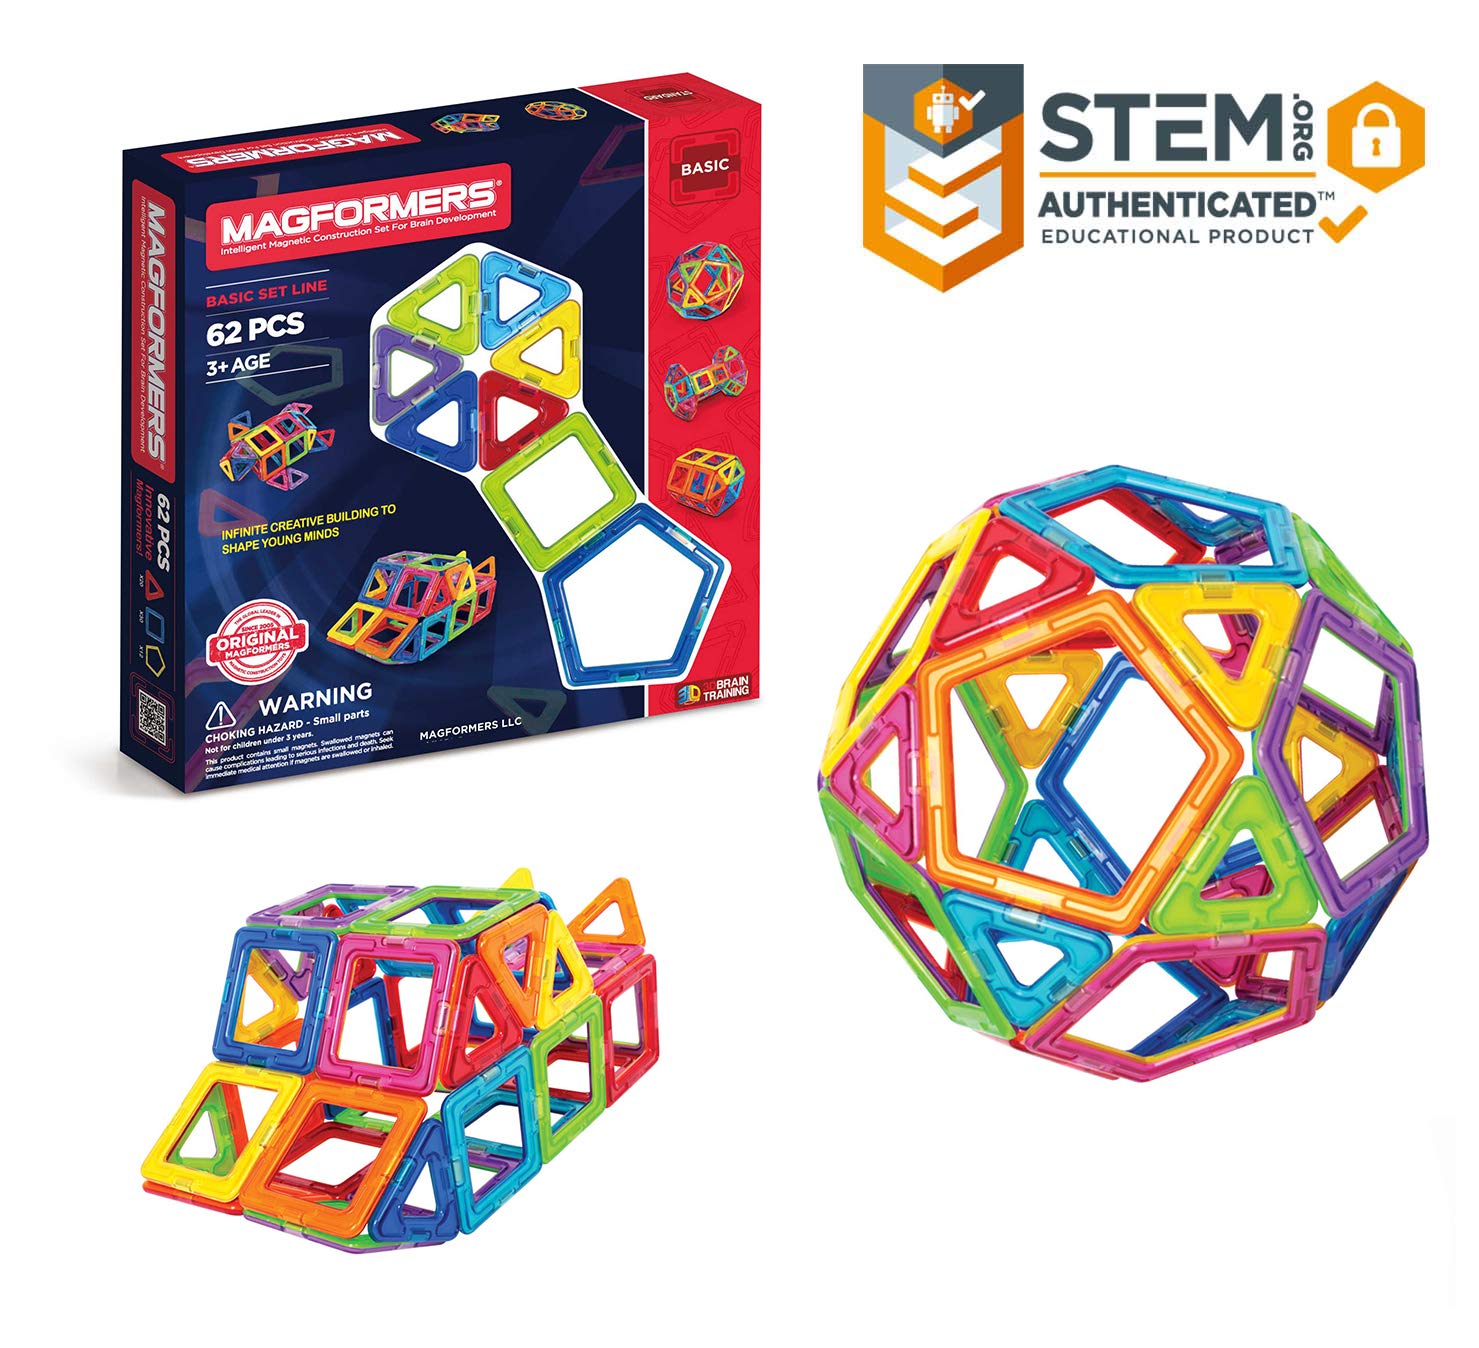 Magformers Basic Set (62-Pieces) Magnetic Building Blocks, Educational Magnetic Tiles, Magnetic Building STEM Toy